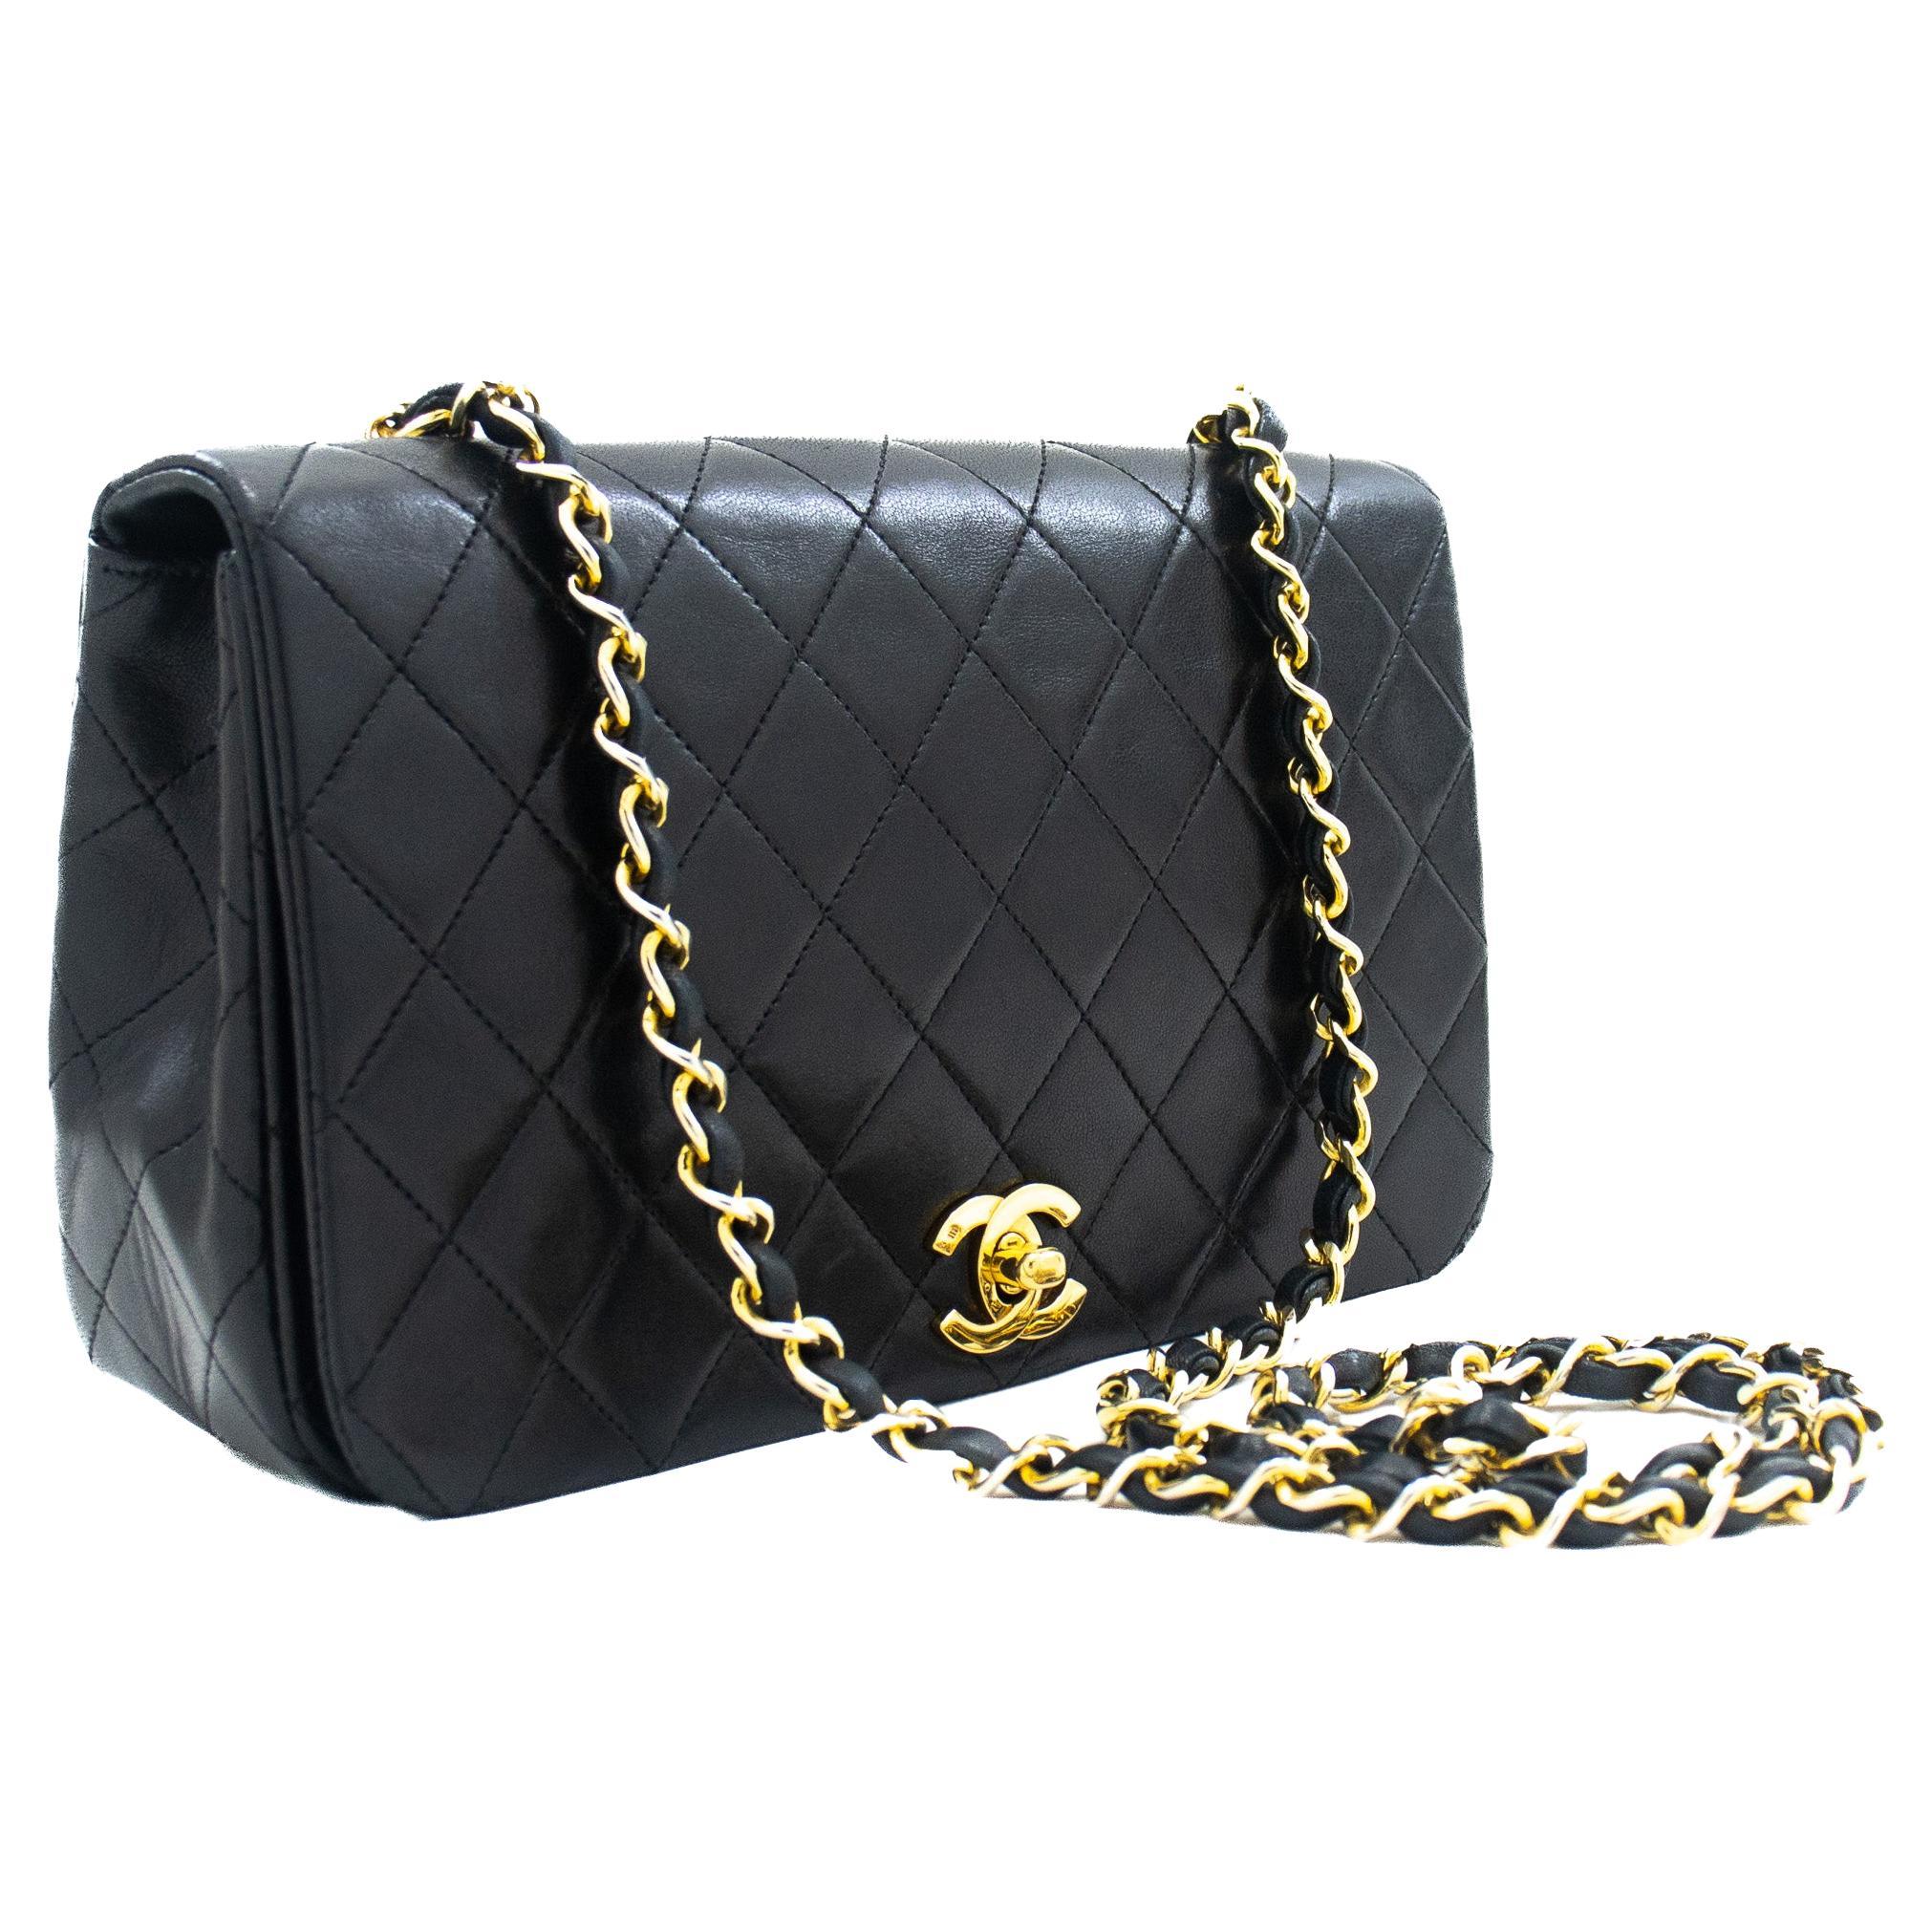 Chanel Full Chain Flap Shoulder Bag Black Quilted Purse Lambskin